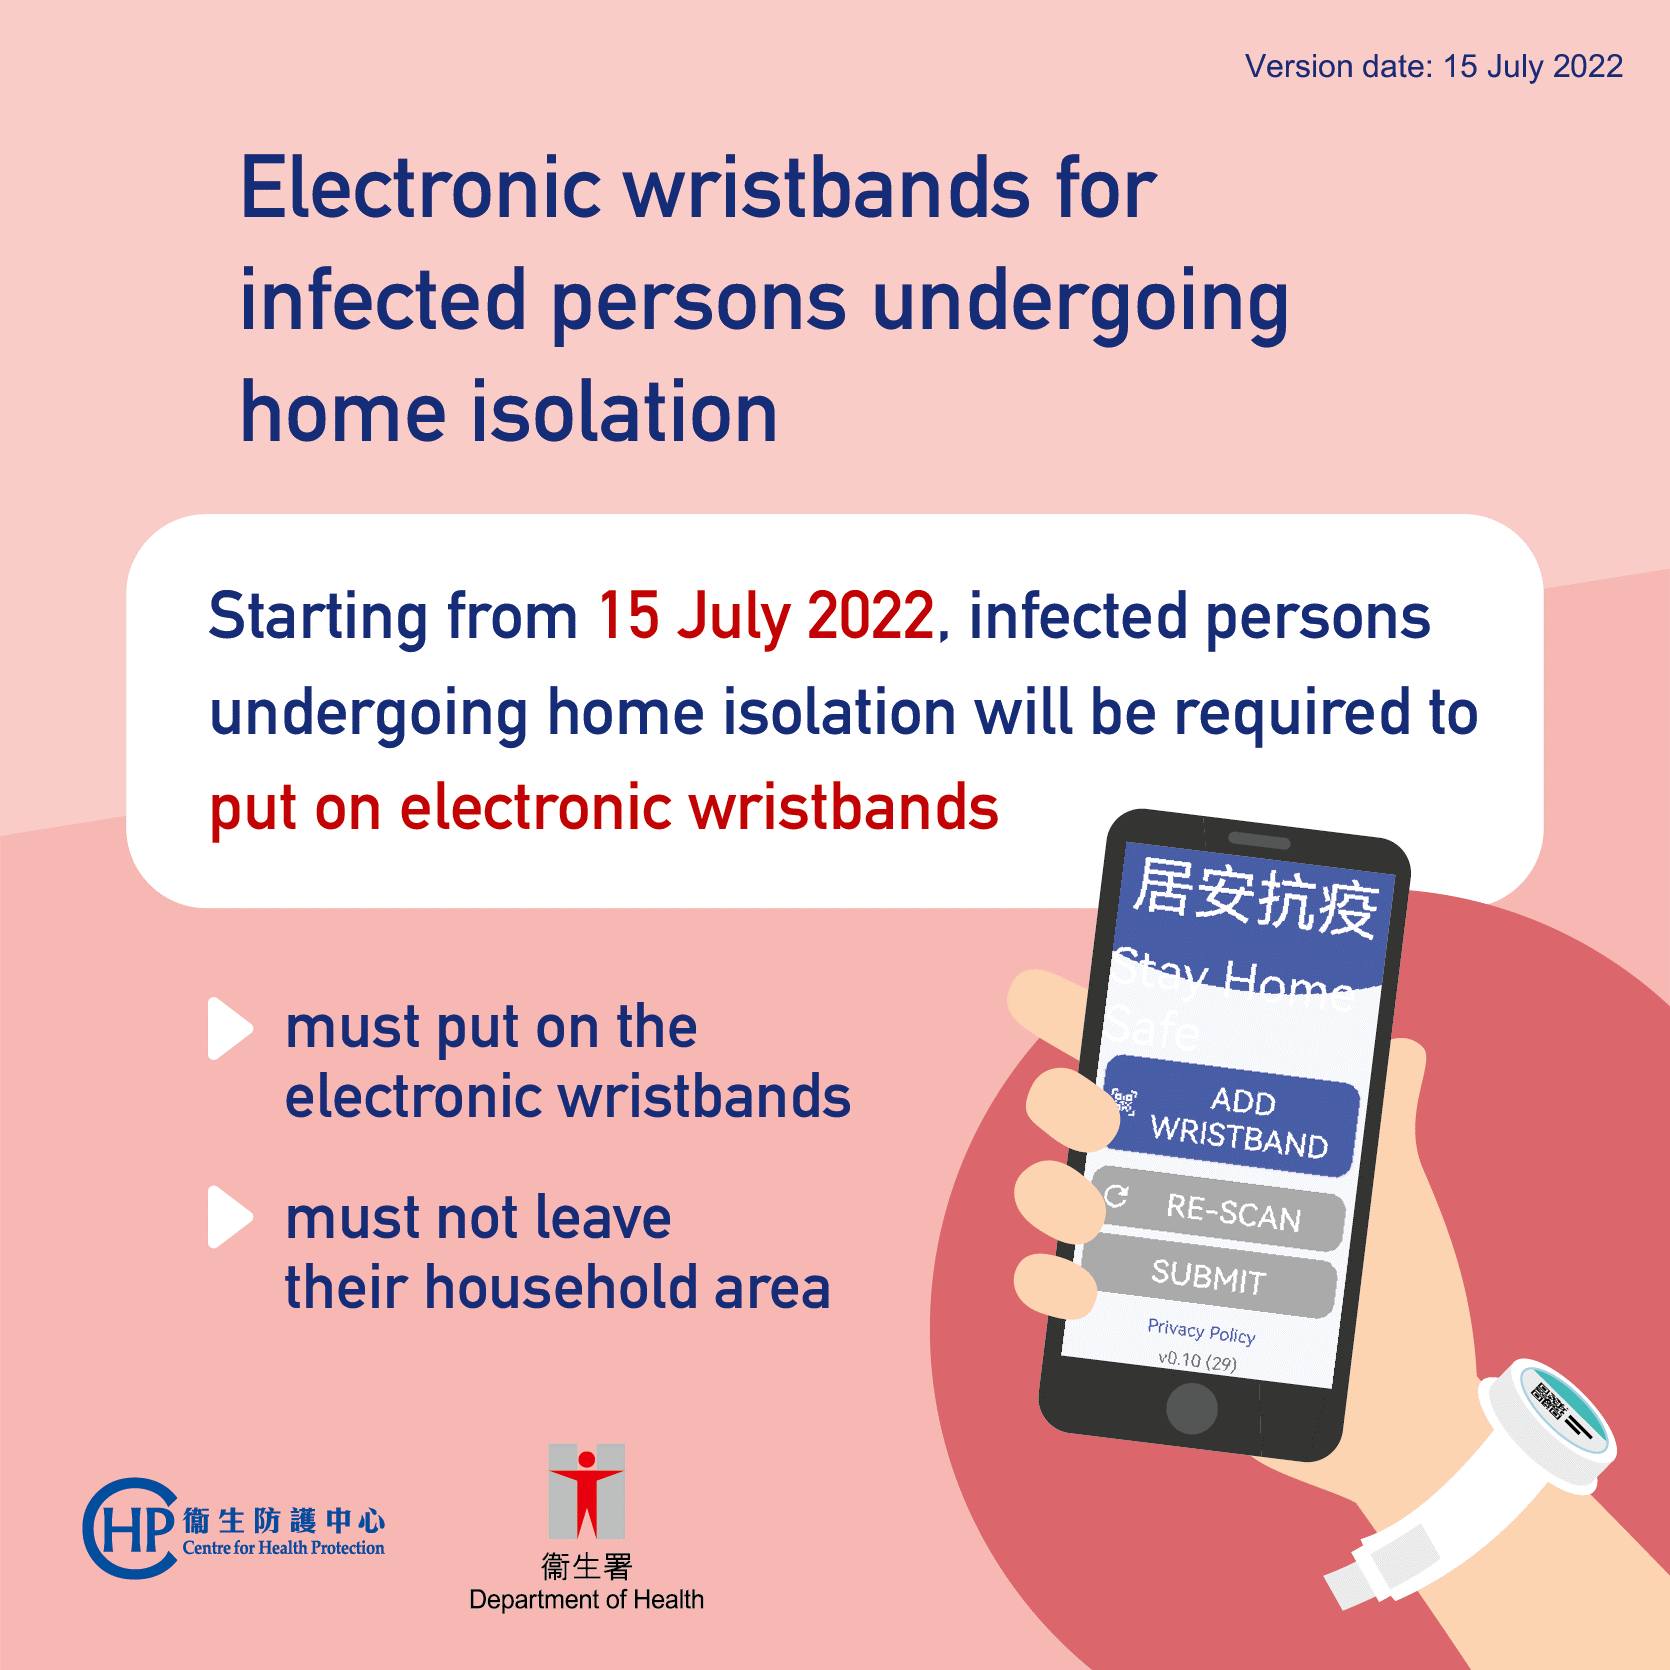 【July 15 onwards: Electronic wristbands for infected persons undergoing home isolation】